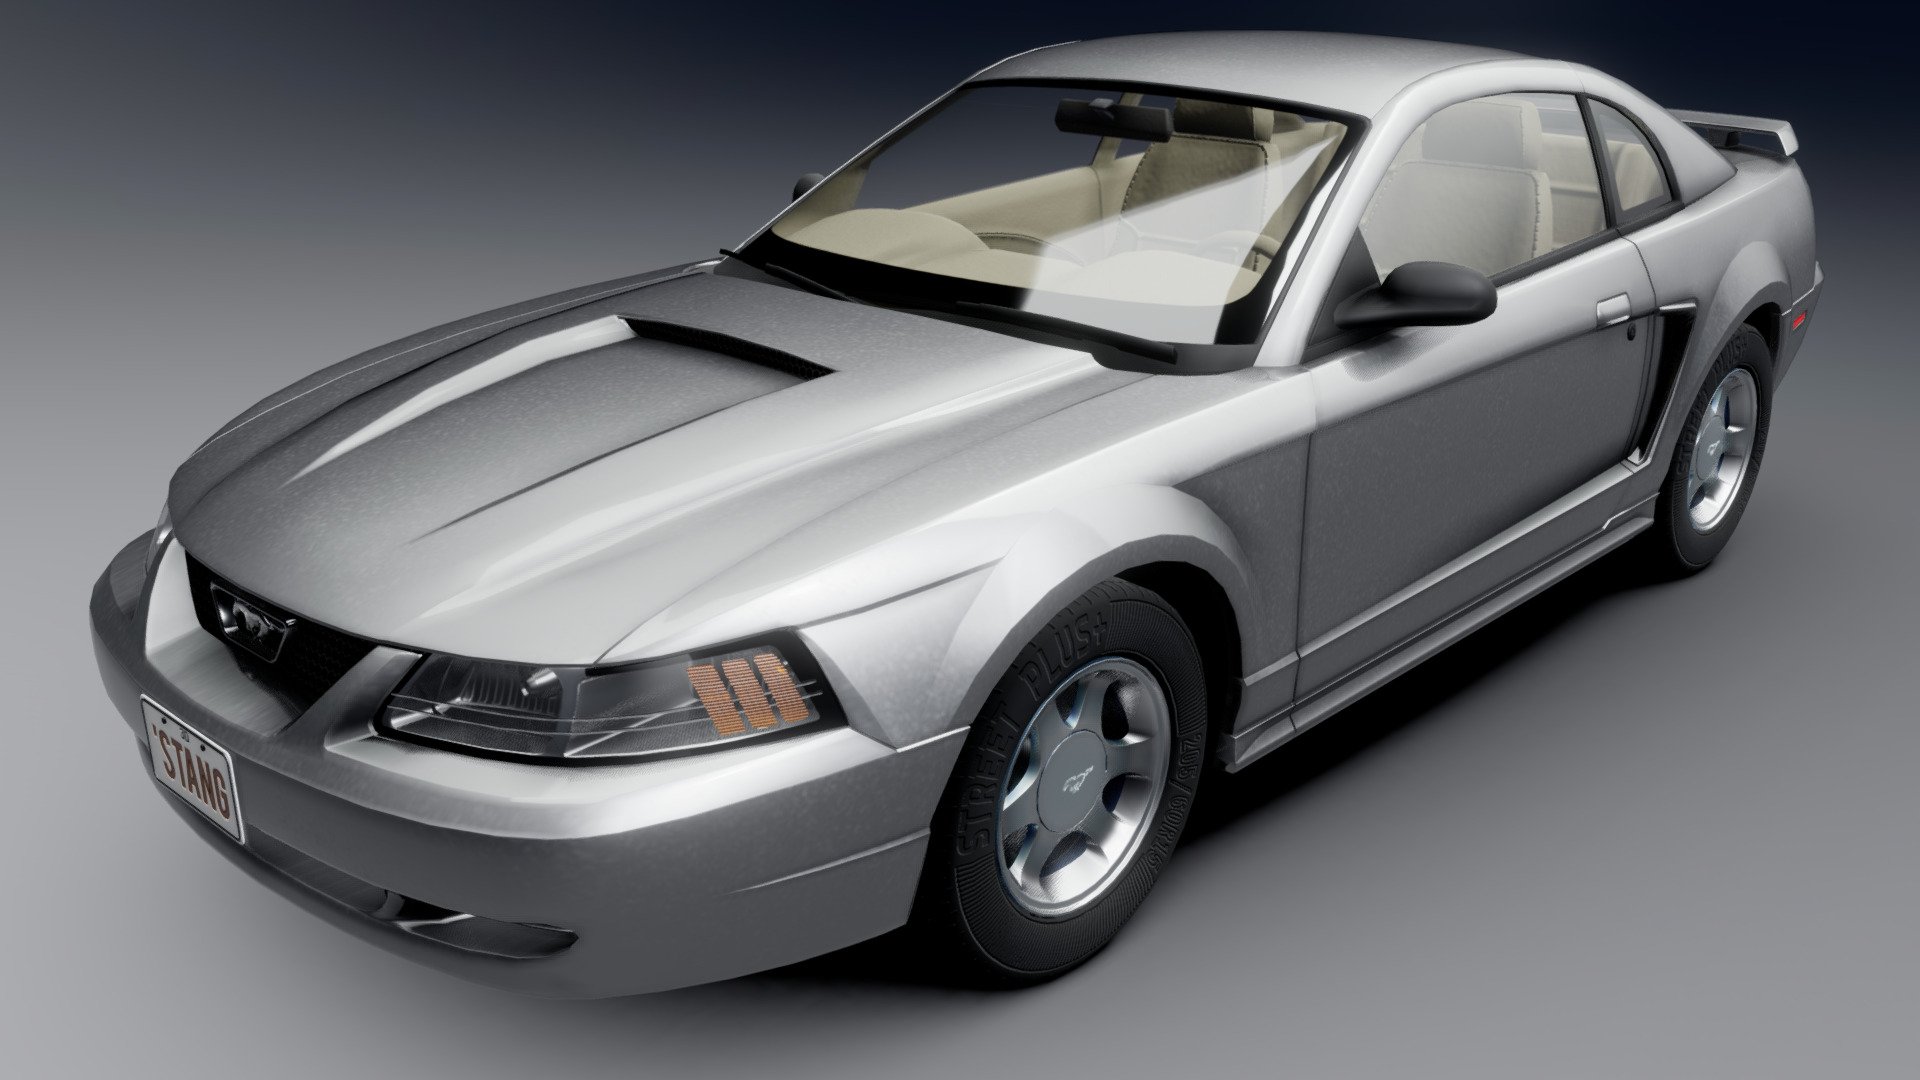 Ford Mustang V6 (New Edge) - Buy Royalty Free 3D Model By Mgr '99 (@Mgr99)  [A19E733]